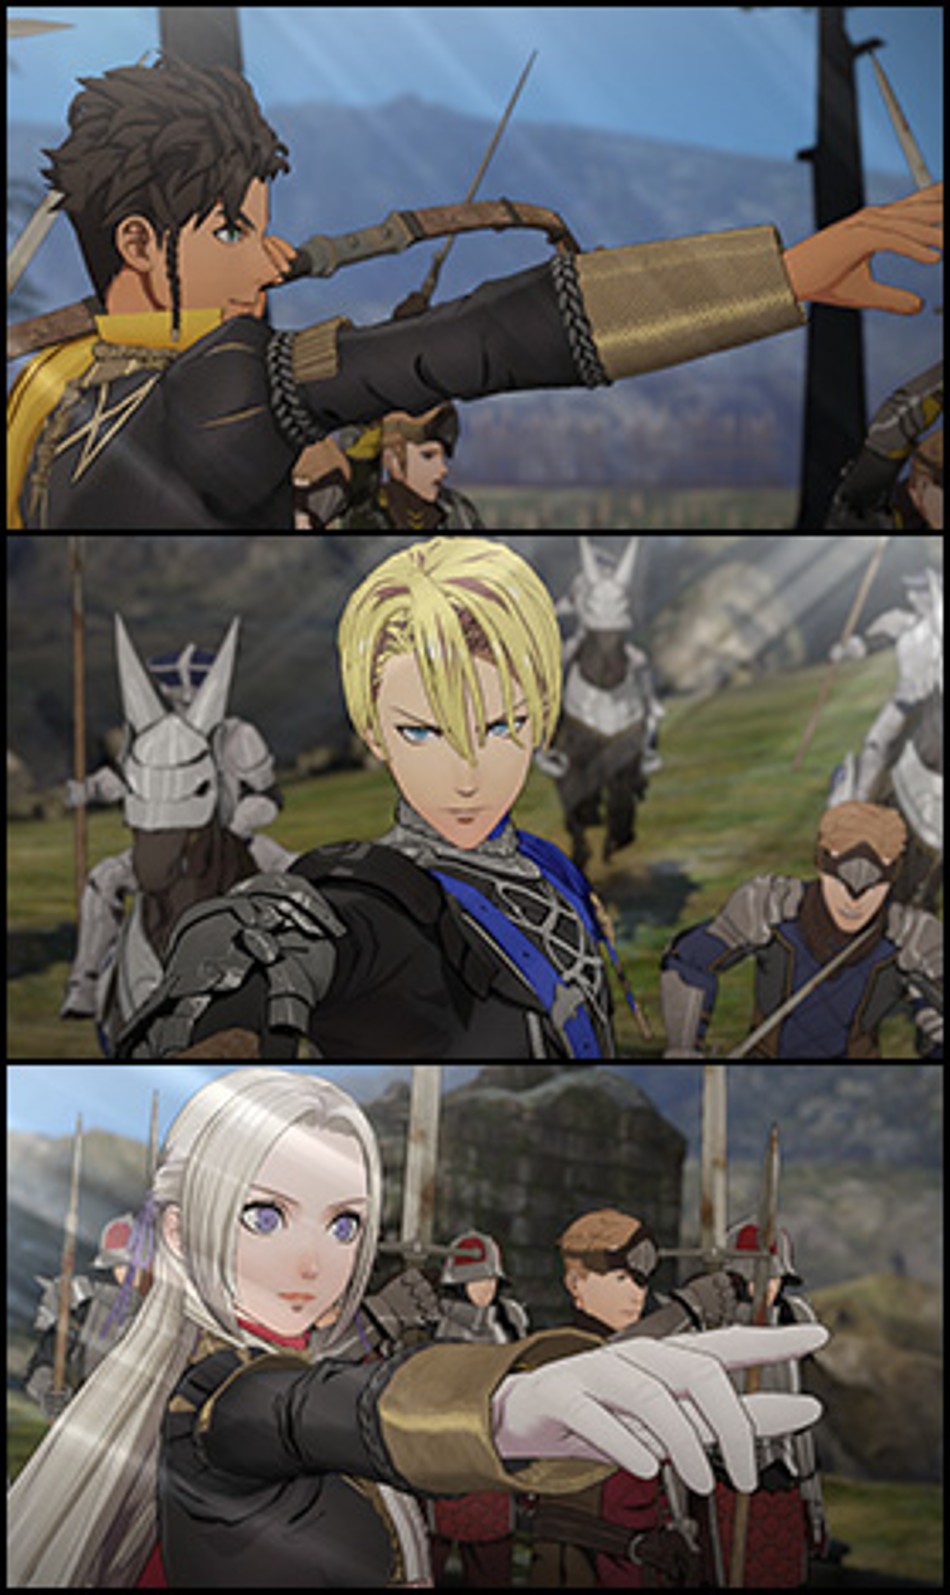 NSwitch_FireEmblemThreeHouses_Overview_War_scr_mob.jpg